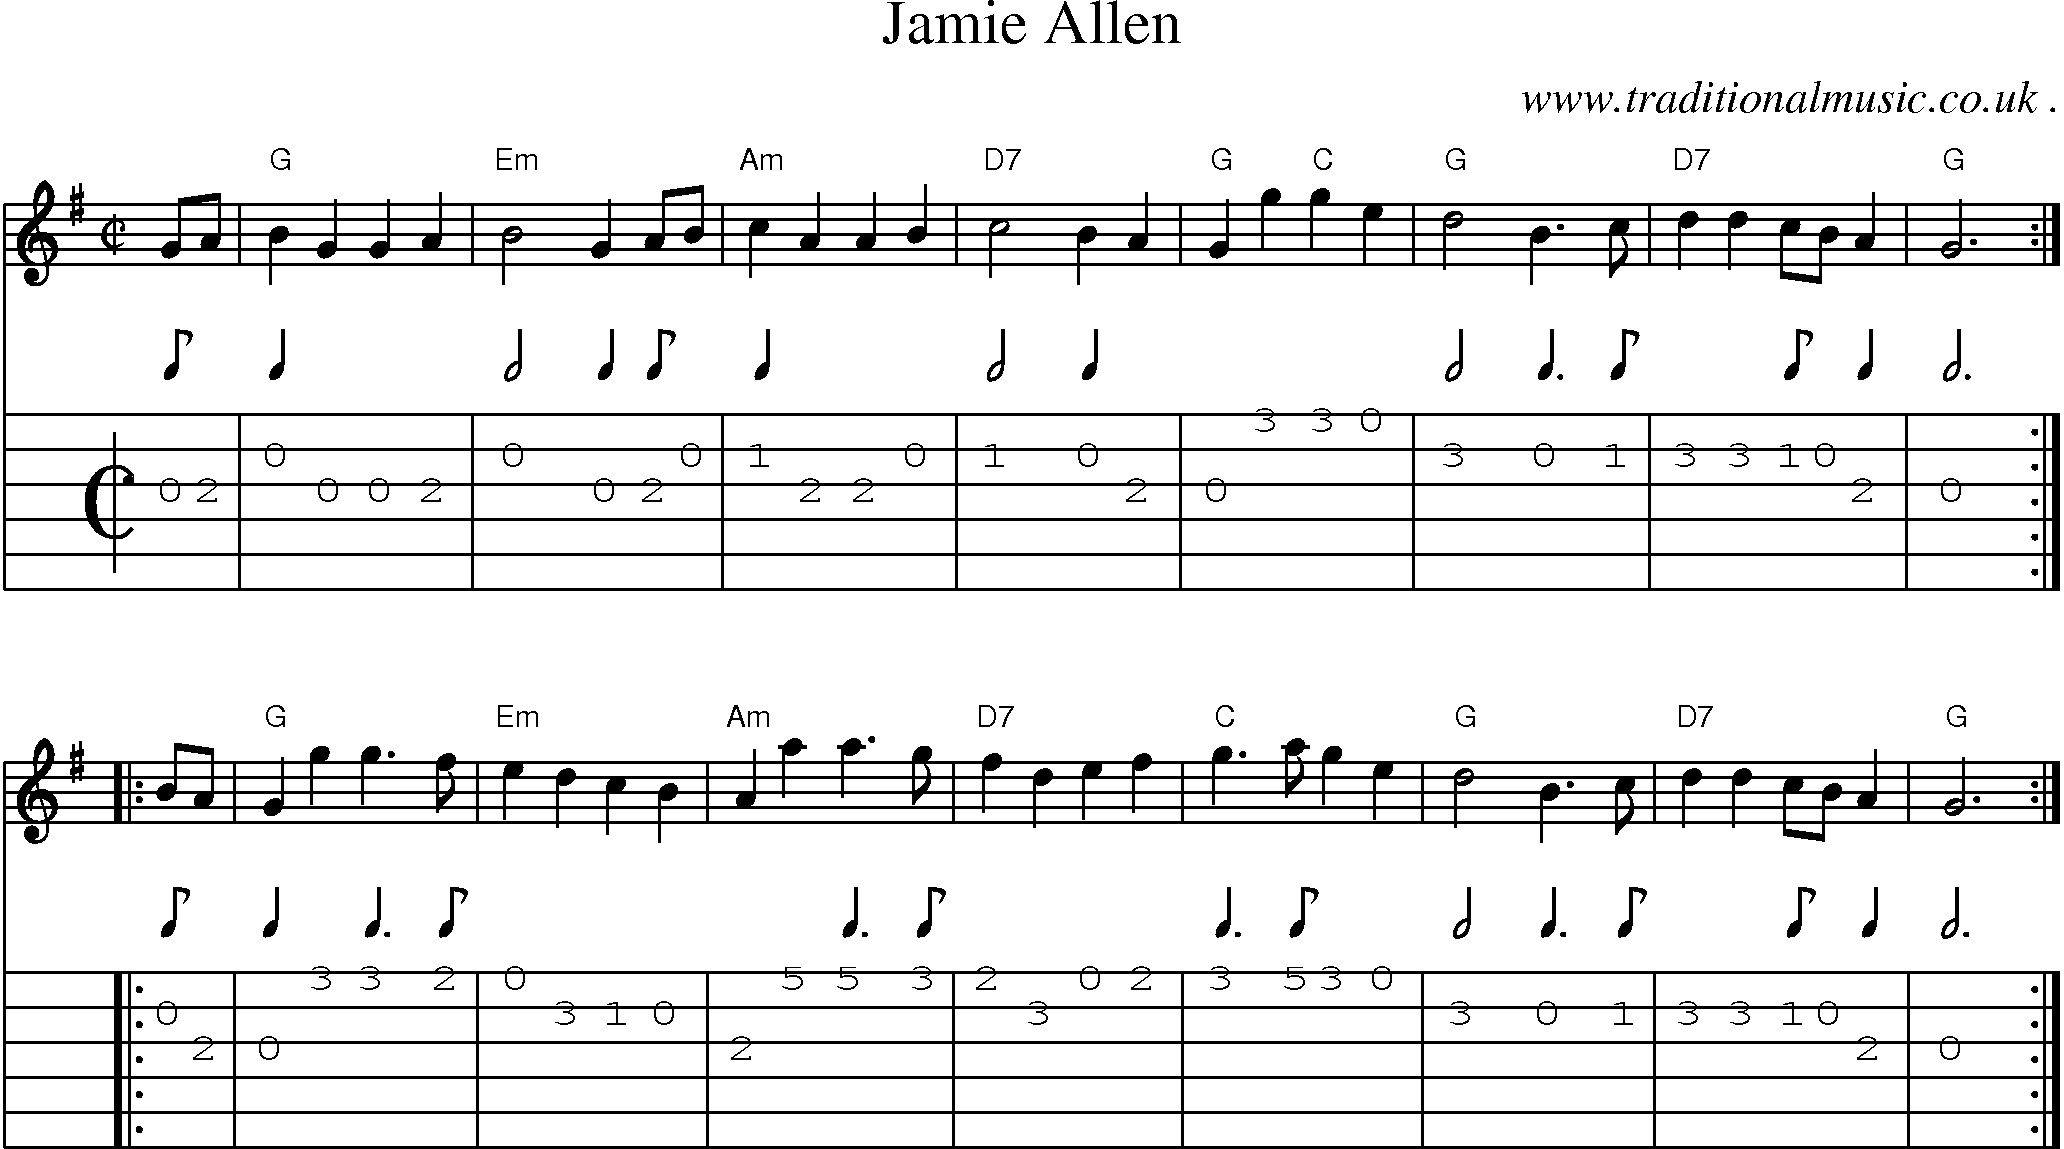 Sheet-music  score, Chords and Guitar Tabs for Jamie Allen